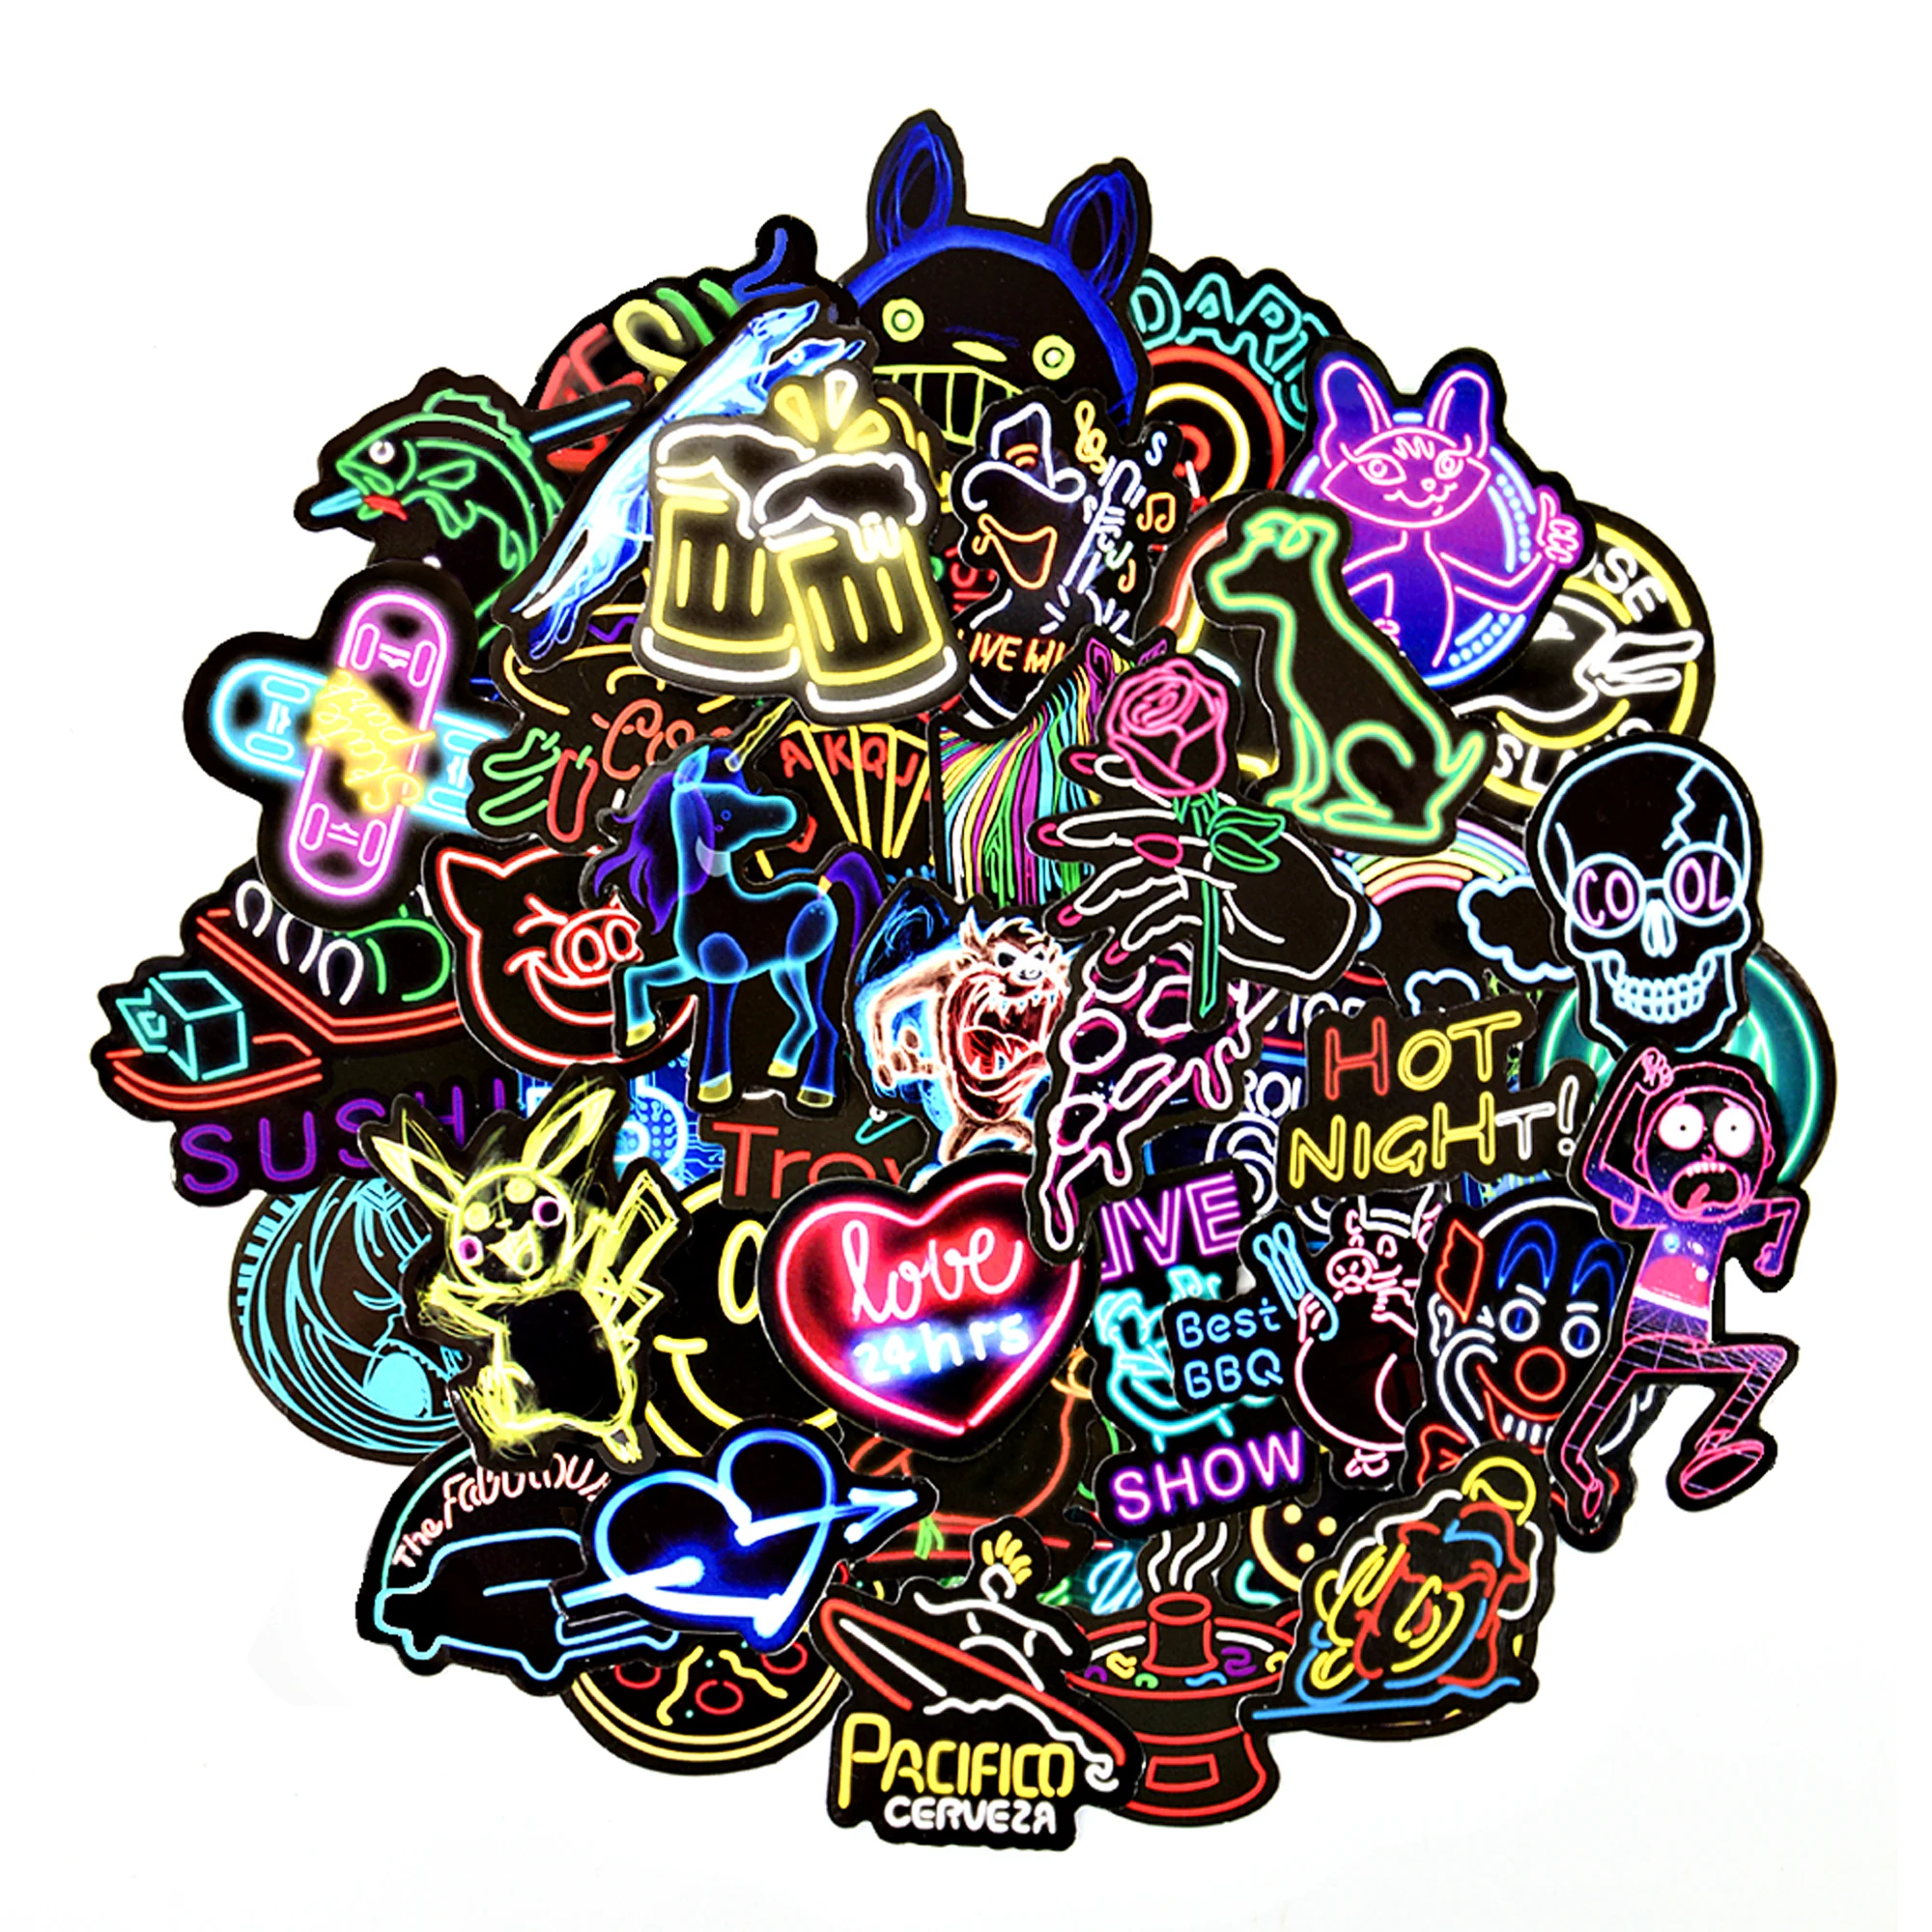 50x Neon Light Sign Stickers Skateboard Laptop Car Phone Decals Stickerbomb US,, 